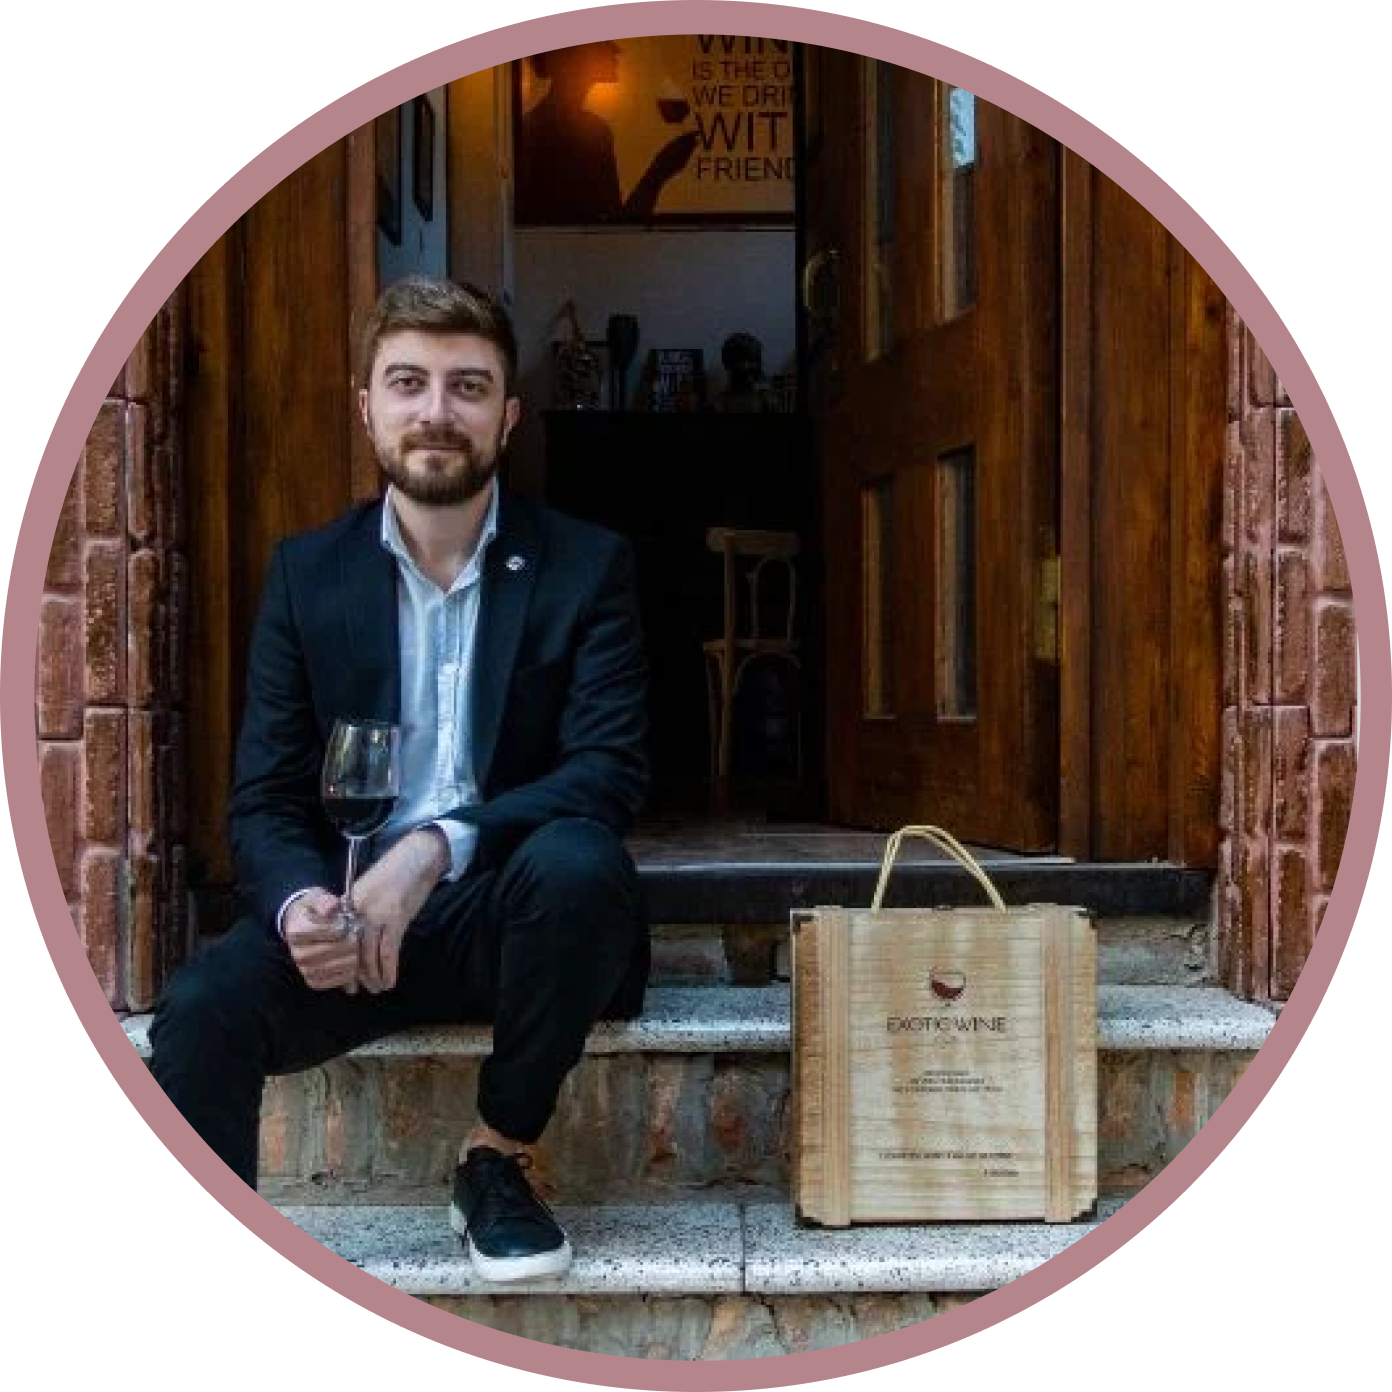 Georgian sommelier Tazo Tamazashvili sitting on stairs, smiling and holding a glass of wine next to a box from Exotic Wine Club.